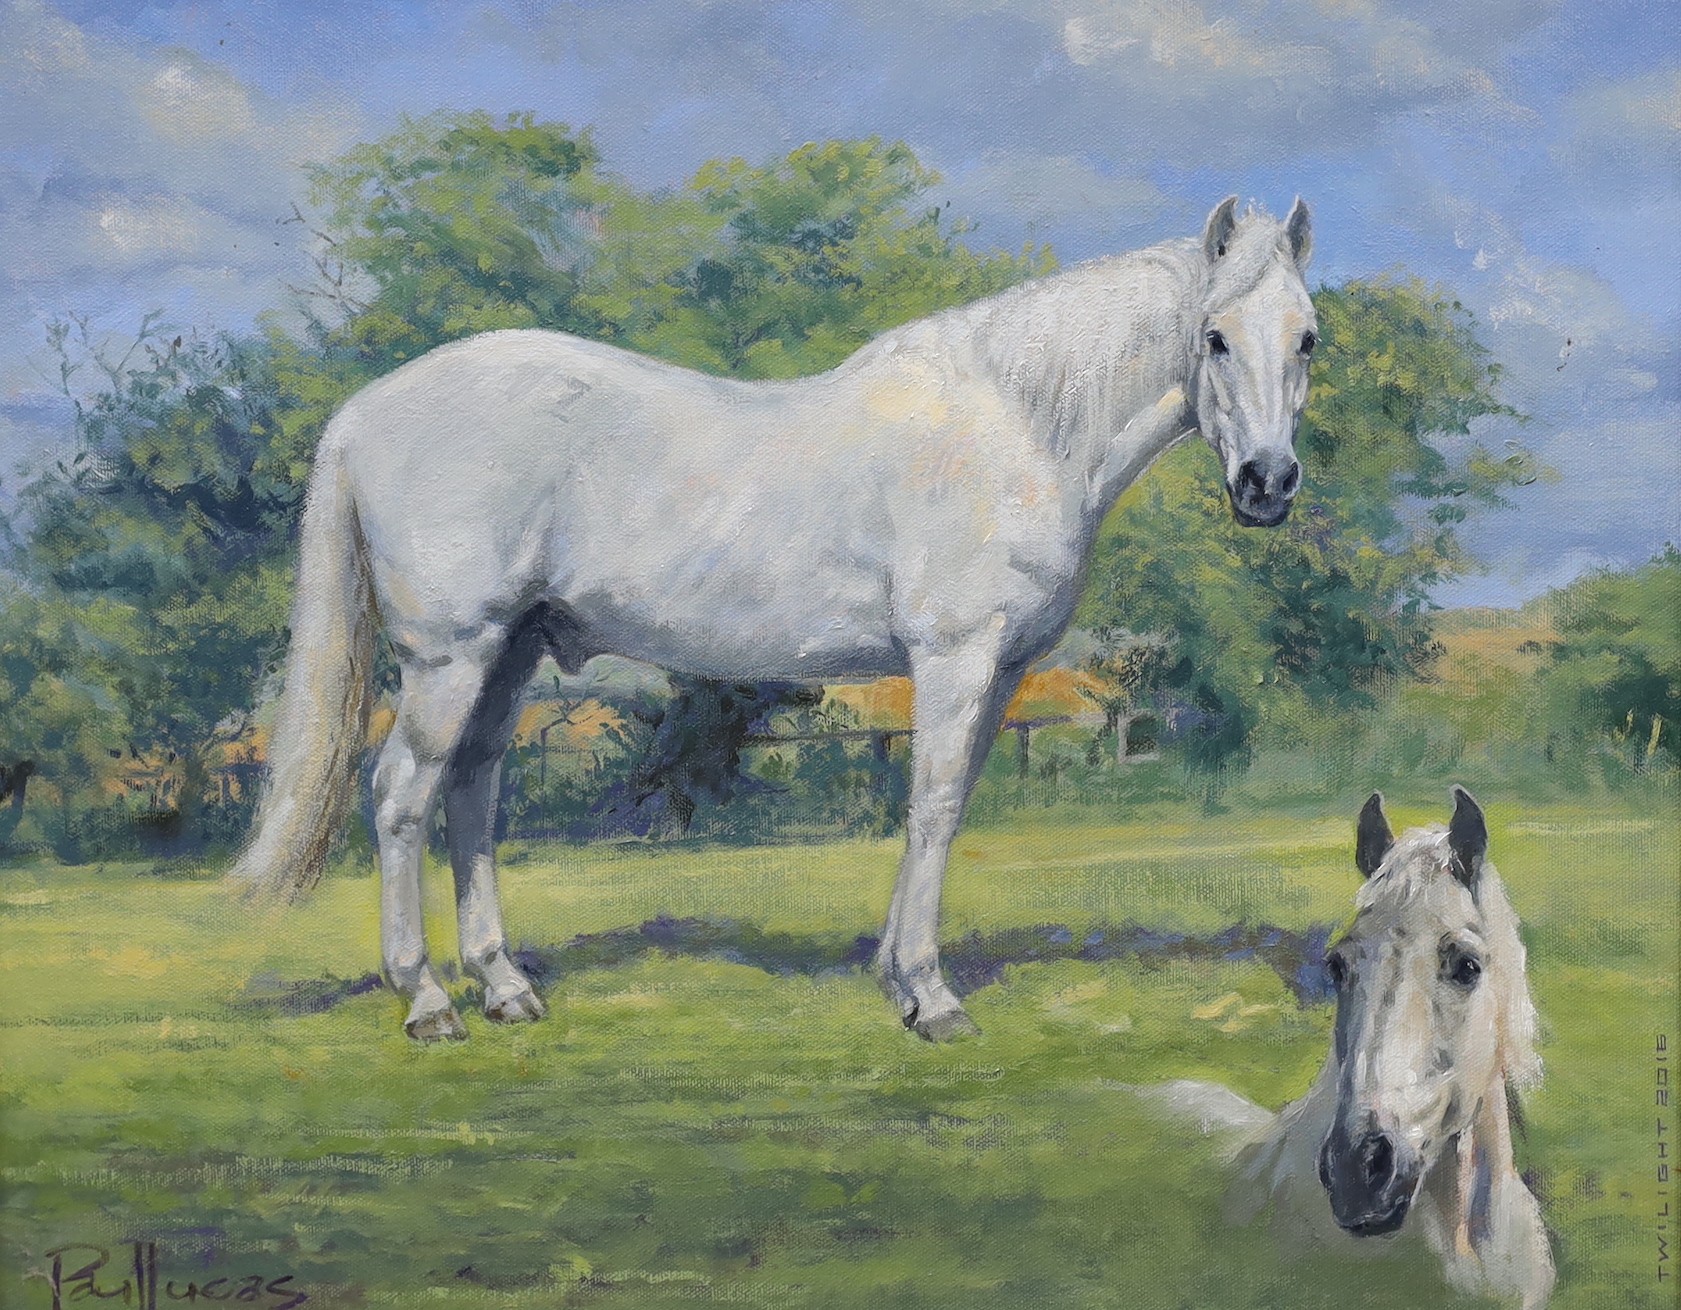 Paul Lucas ASEA, oil on canvas, 'Twilight' portrait of a white stallion, signed and dated 20 16, 39 x 49cm                                                                                                                  